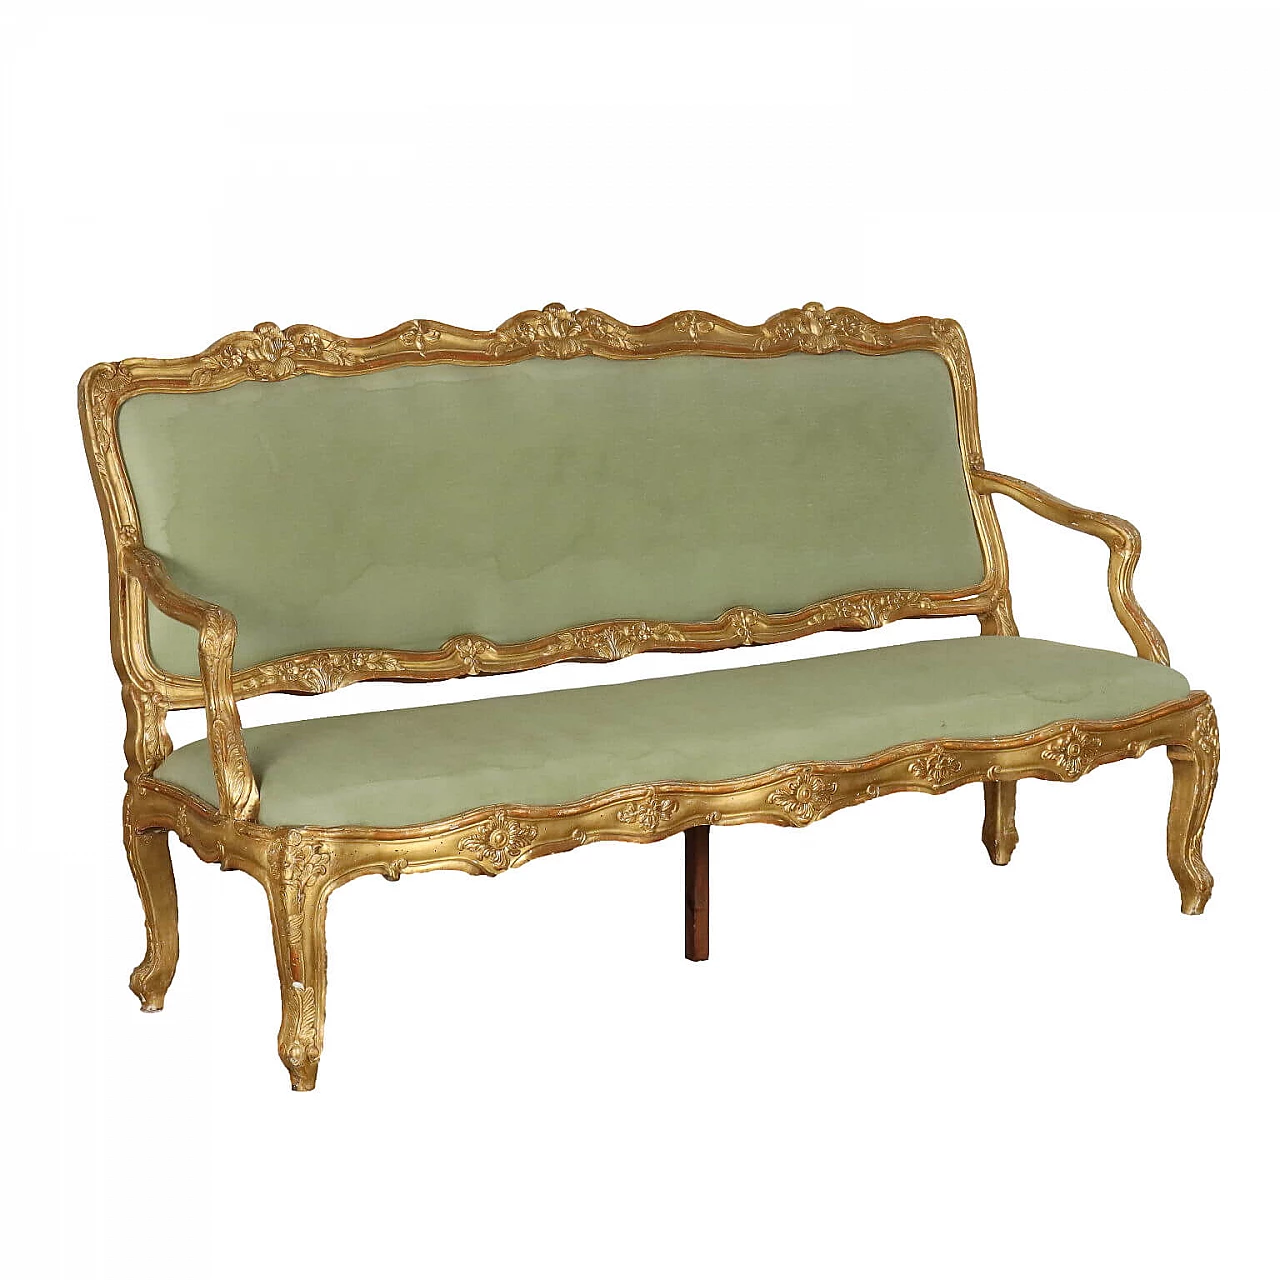 Carved and gilded wooden upholstered sofa in Baroque style, late 19th century 1